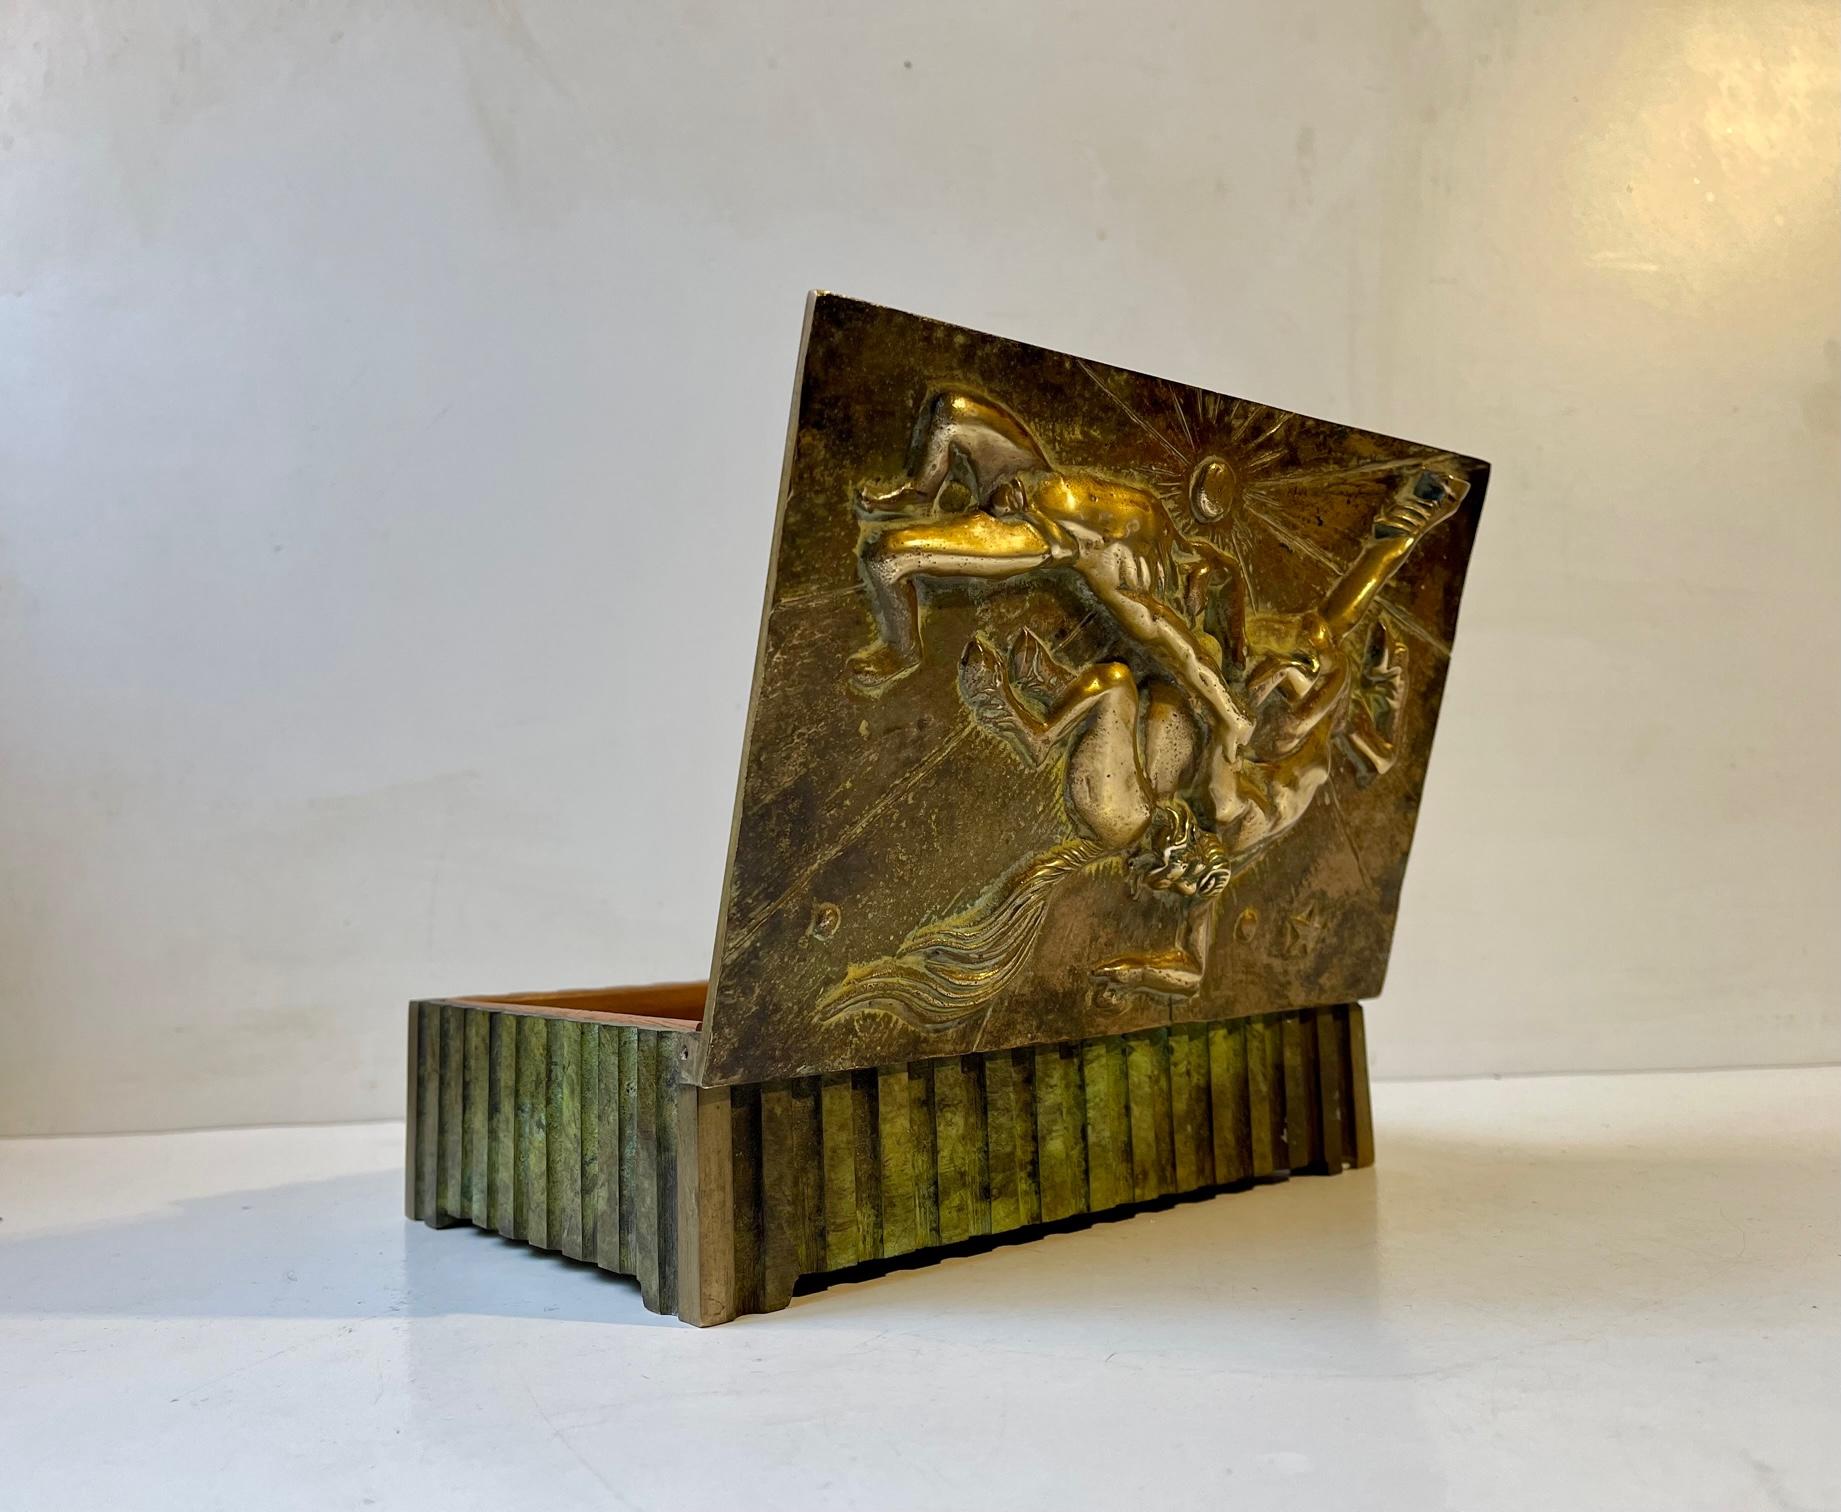 - Heavy Art Deco bronze box with deep ribbings. 
- Clean and strict architectural design.
- Masculine and powerfull appearance
- Mythological scene in relief with centaurs or Ixionida in combat with man. 
- Rich and original patina 
- It was